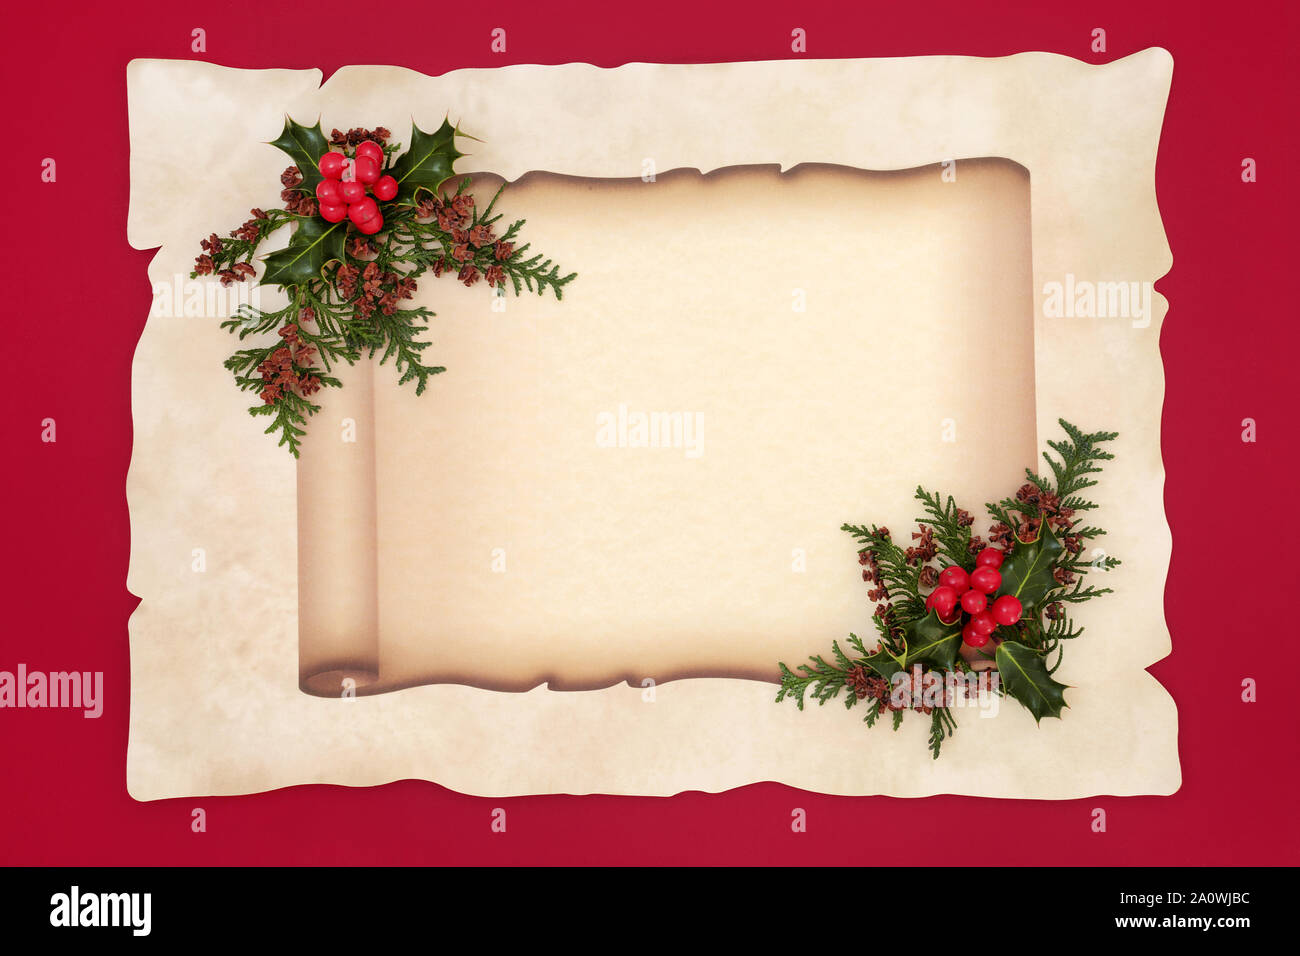 https://c8.alamy.com/comp/2A0WJBC/holly-berry-and-cedar-cypress-leaf-sprigs-on-old-scroll-and-parchment-paper-on-red-background-document-for-a-christmas-or-winter-theme-2A0WJBC.jpg